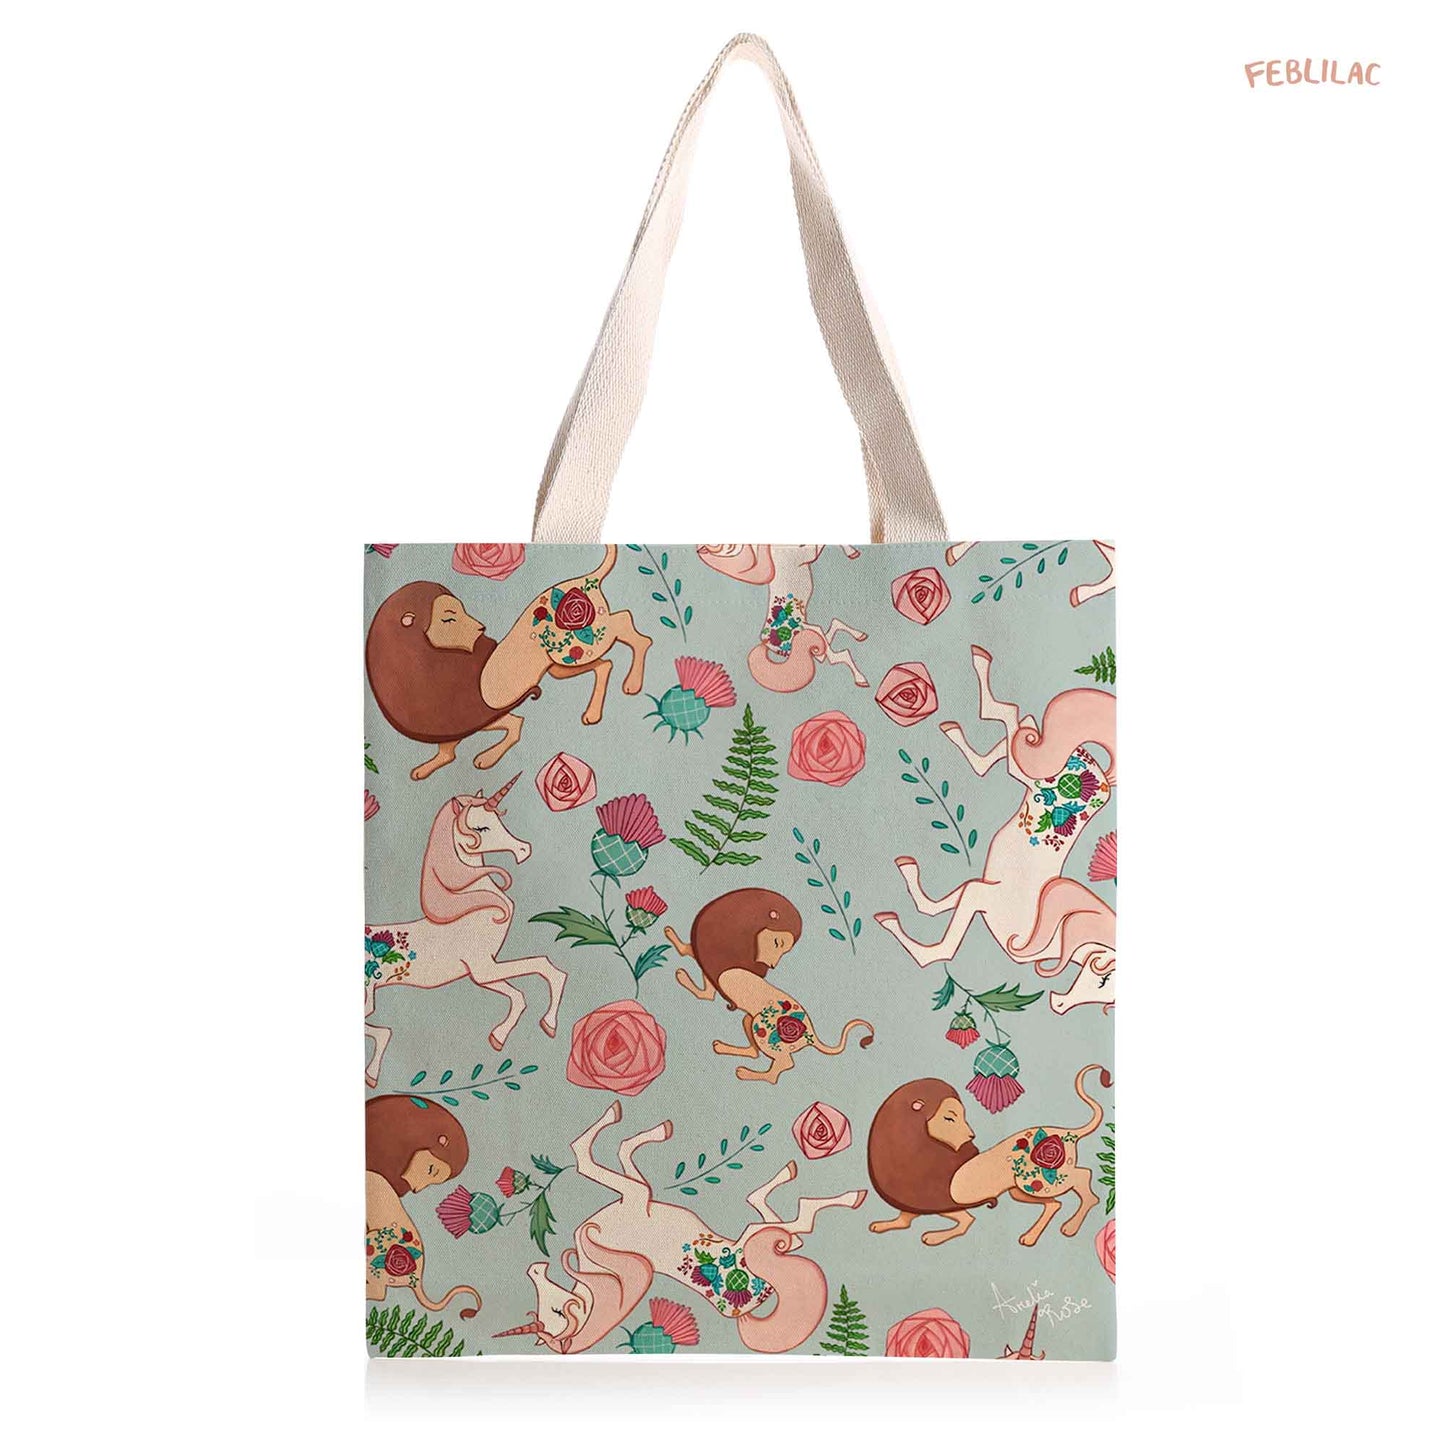 Feblilac The Lion and the Unicorn Canvas Tote Bag by AmeliaRose Illustrations from UK